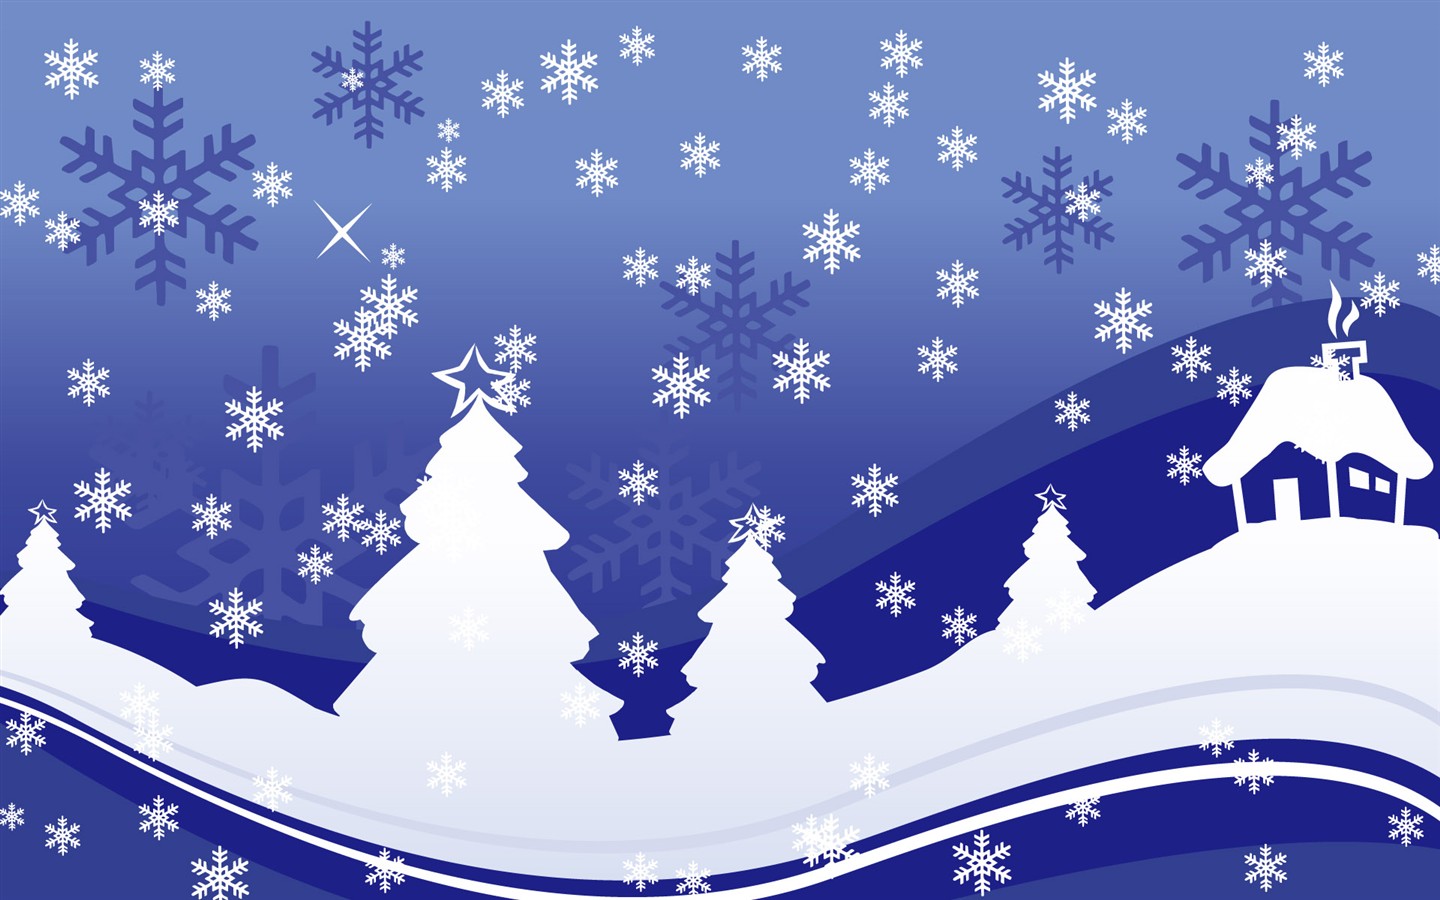 Exquisite Christmas Theme HD Wallpapers #33 - 1440x900